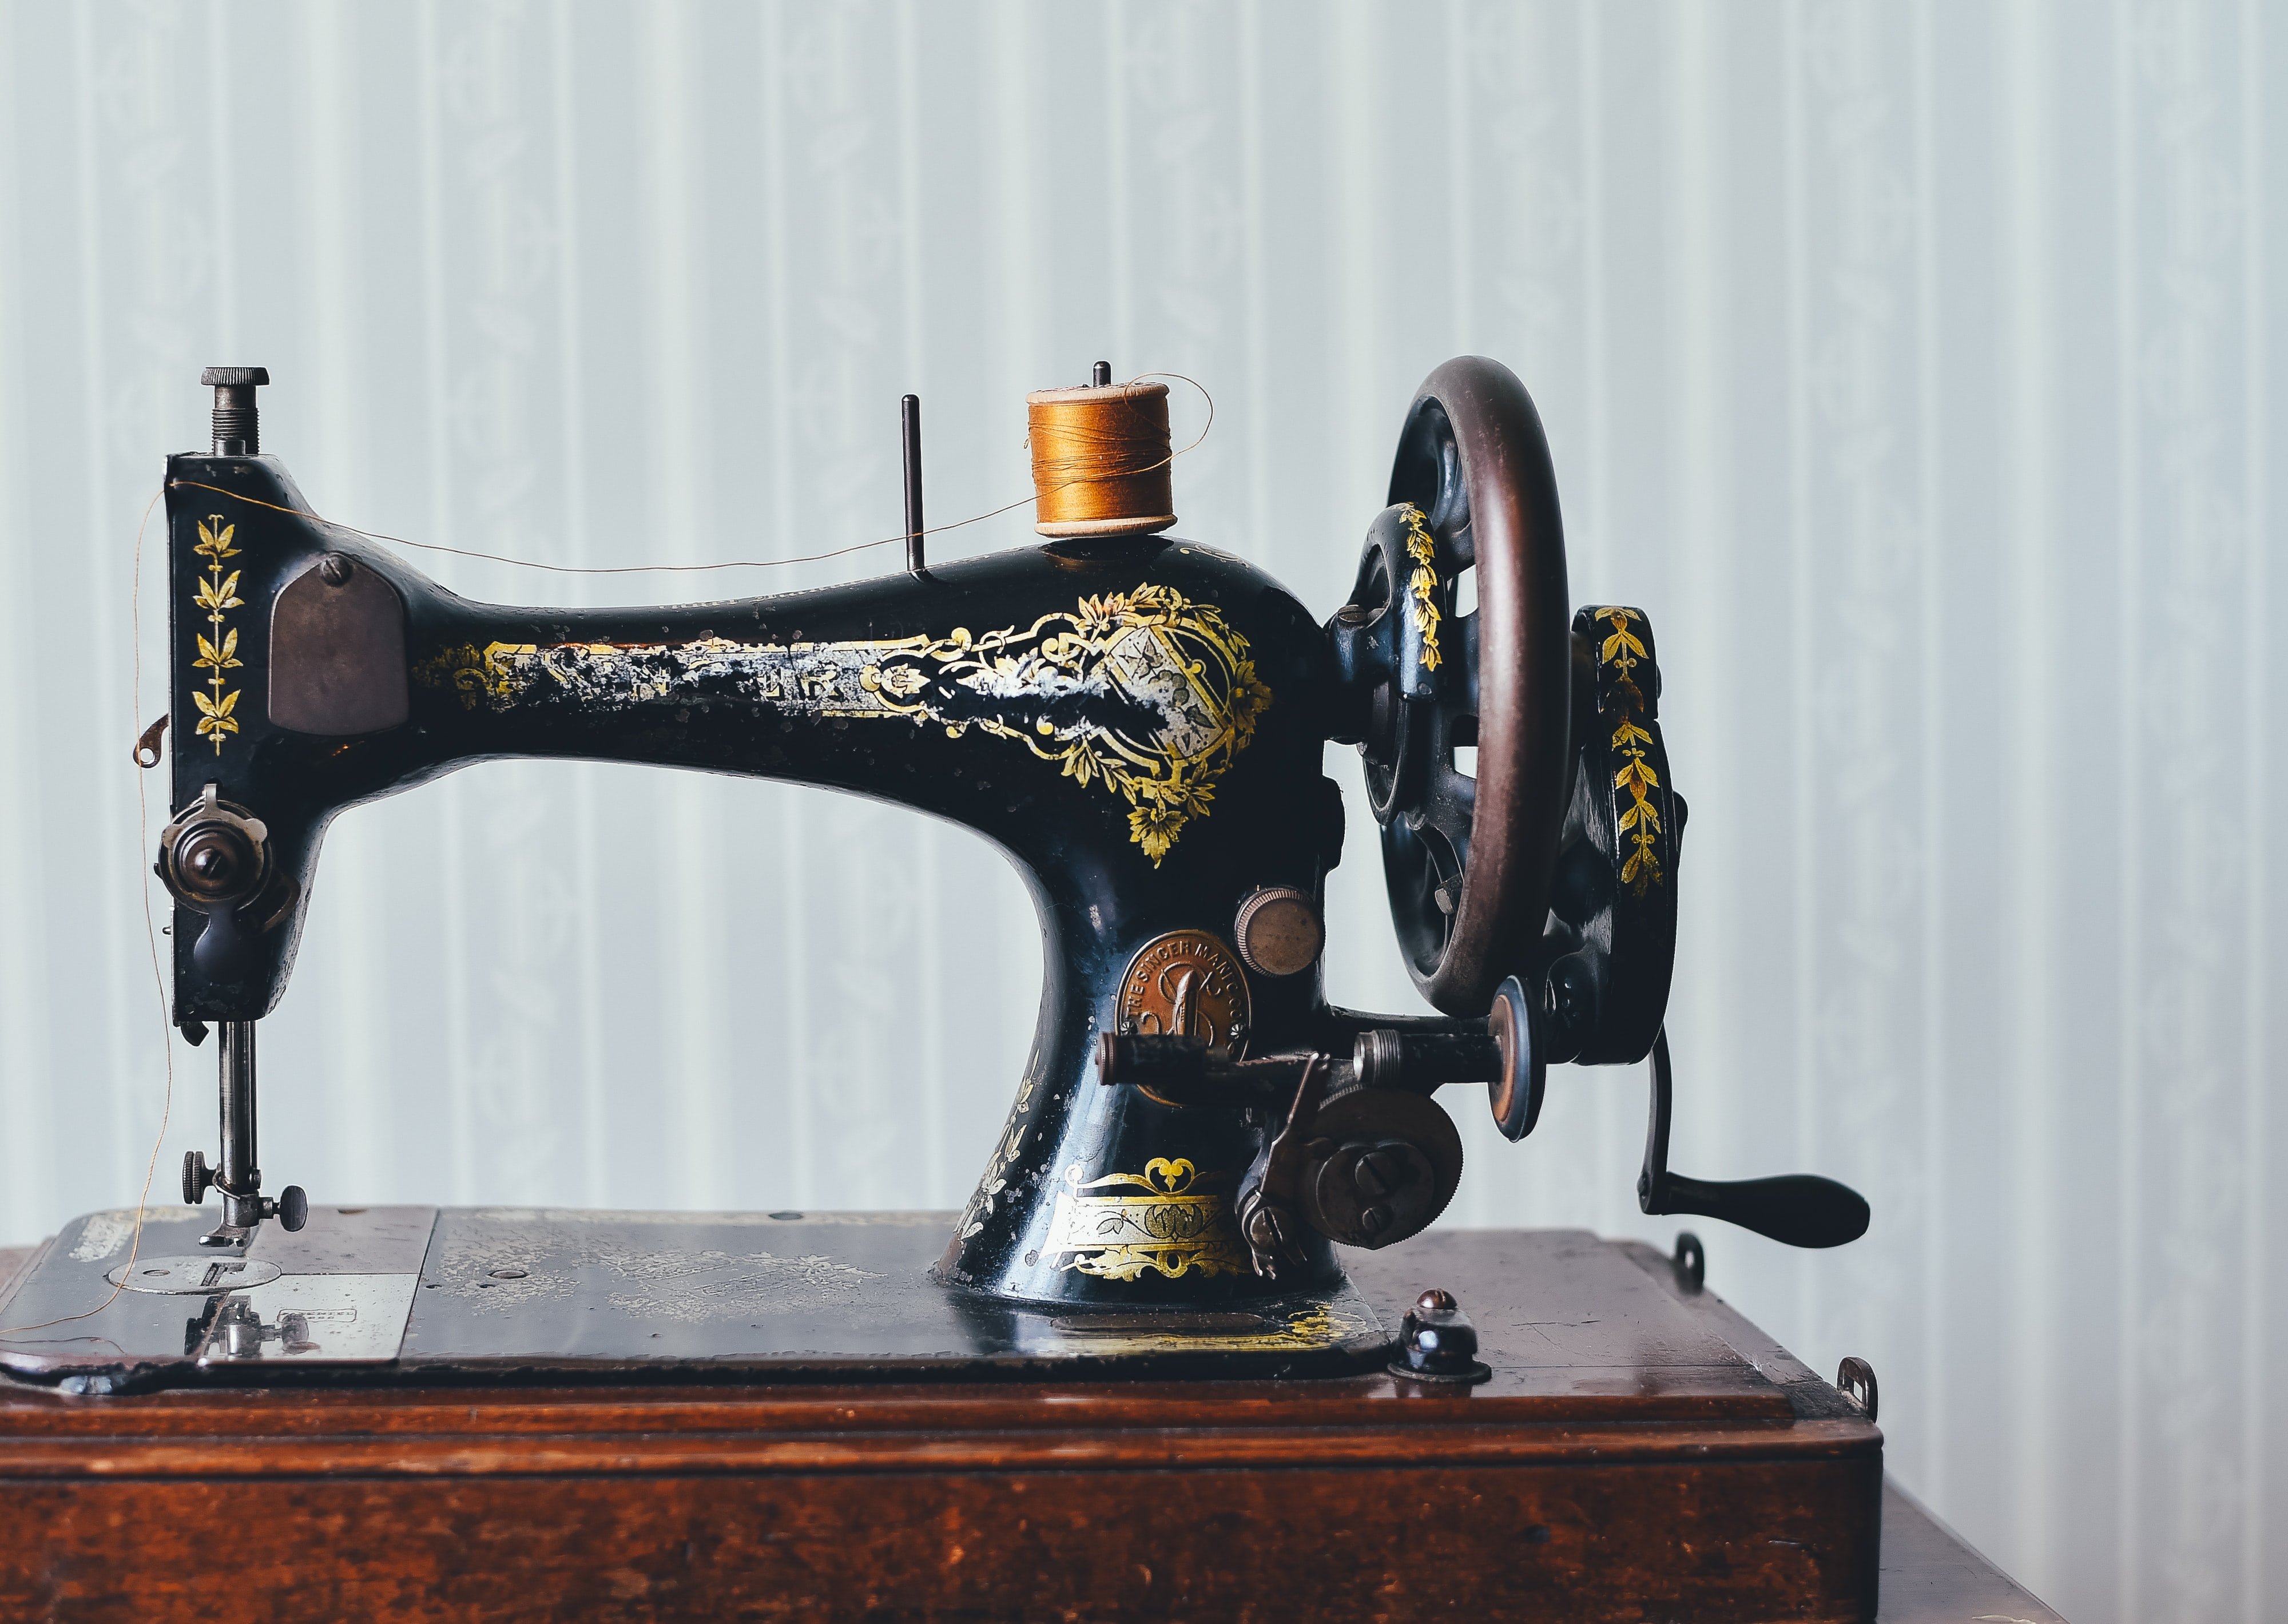 Patricia decided to sell her antique Singer sewing machine. | Source: Unsplash